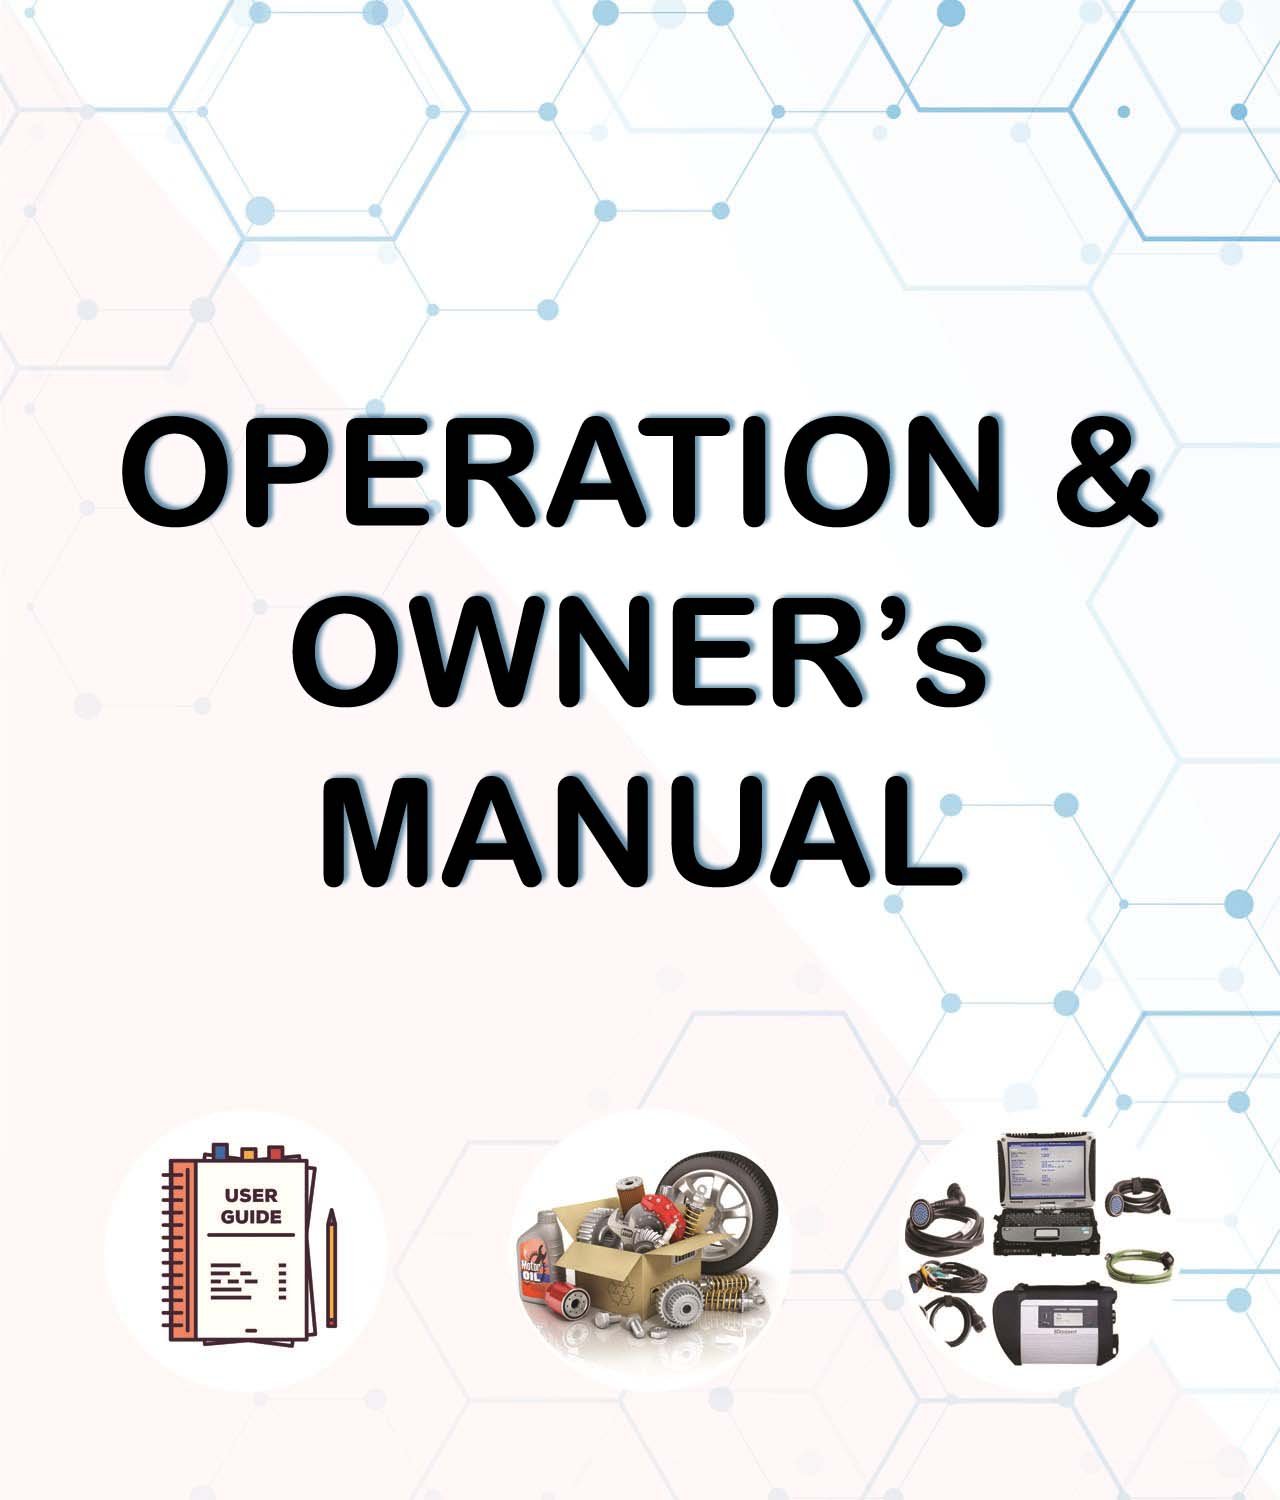 Operation & Owners manuals